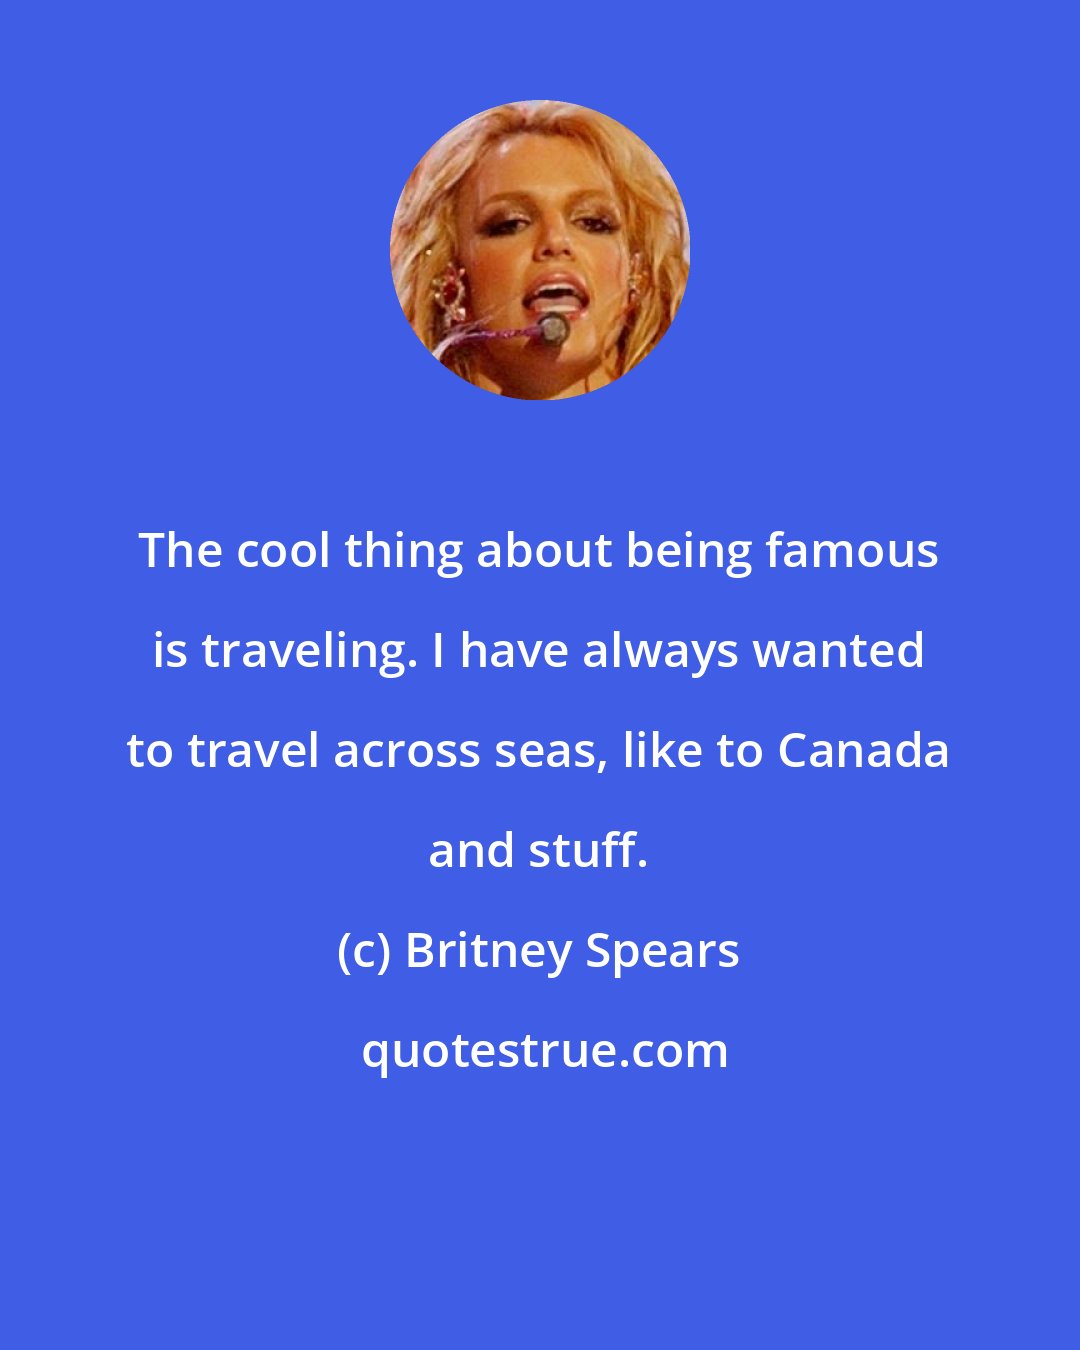 Britney Spears: The cool thing about being famous is traveling. I have always wanted to travel across seas, like to Canada and stuff.